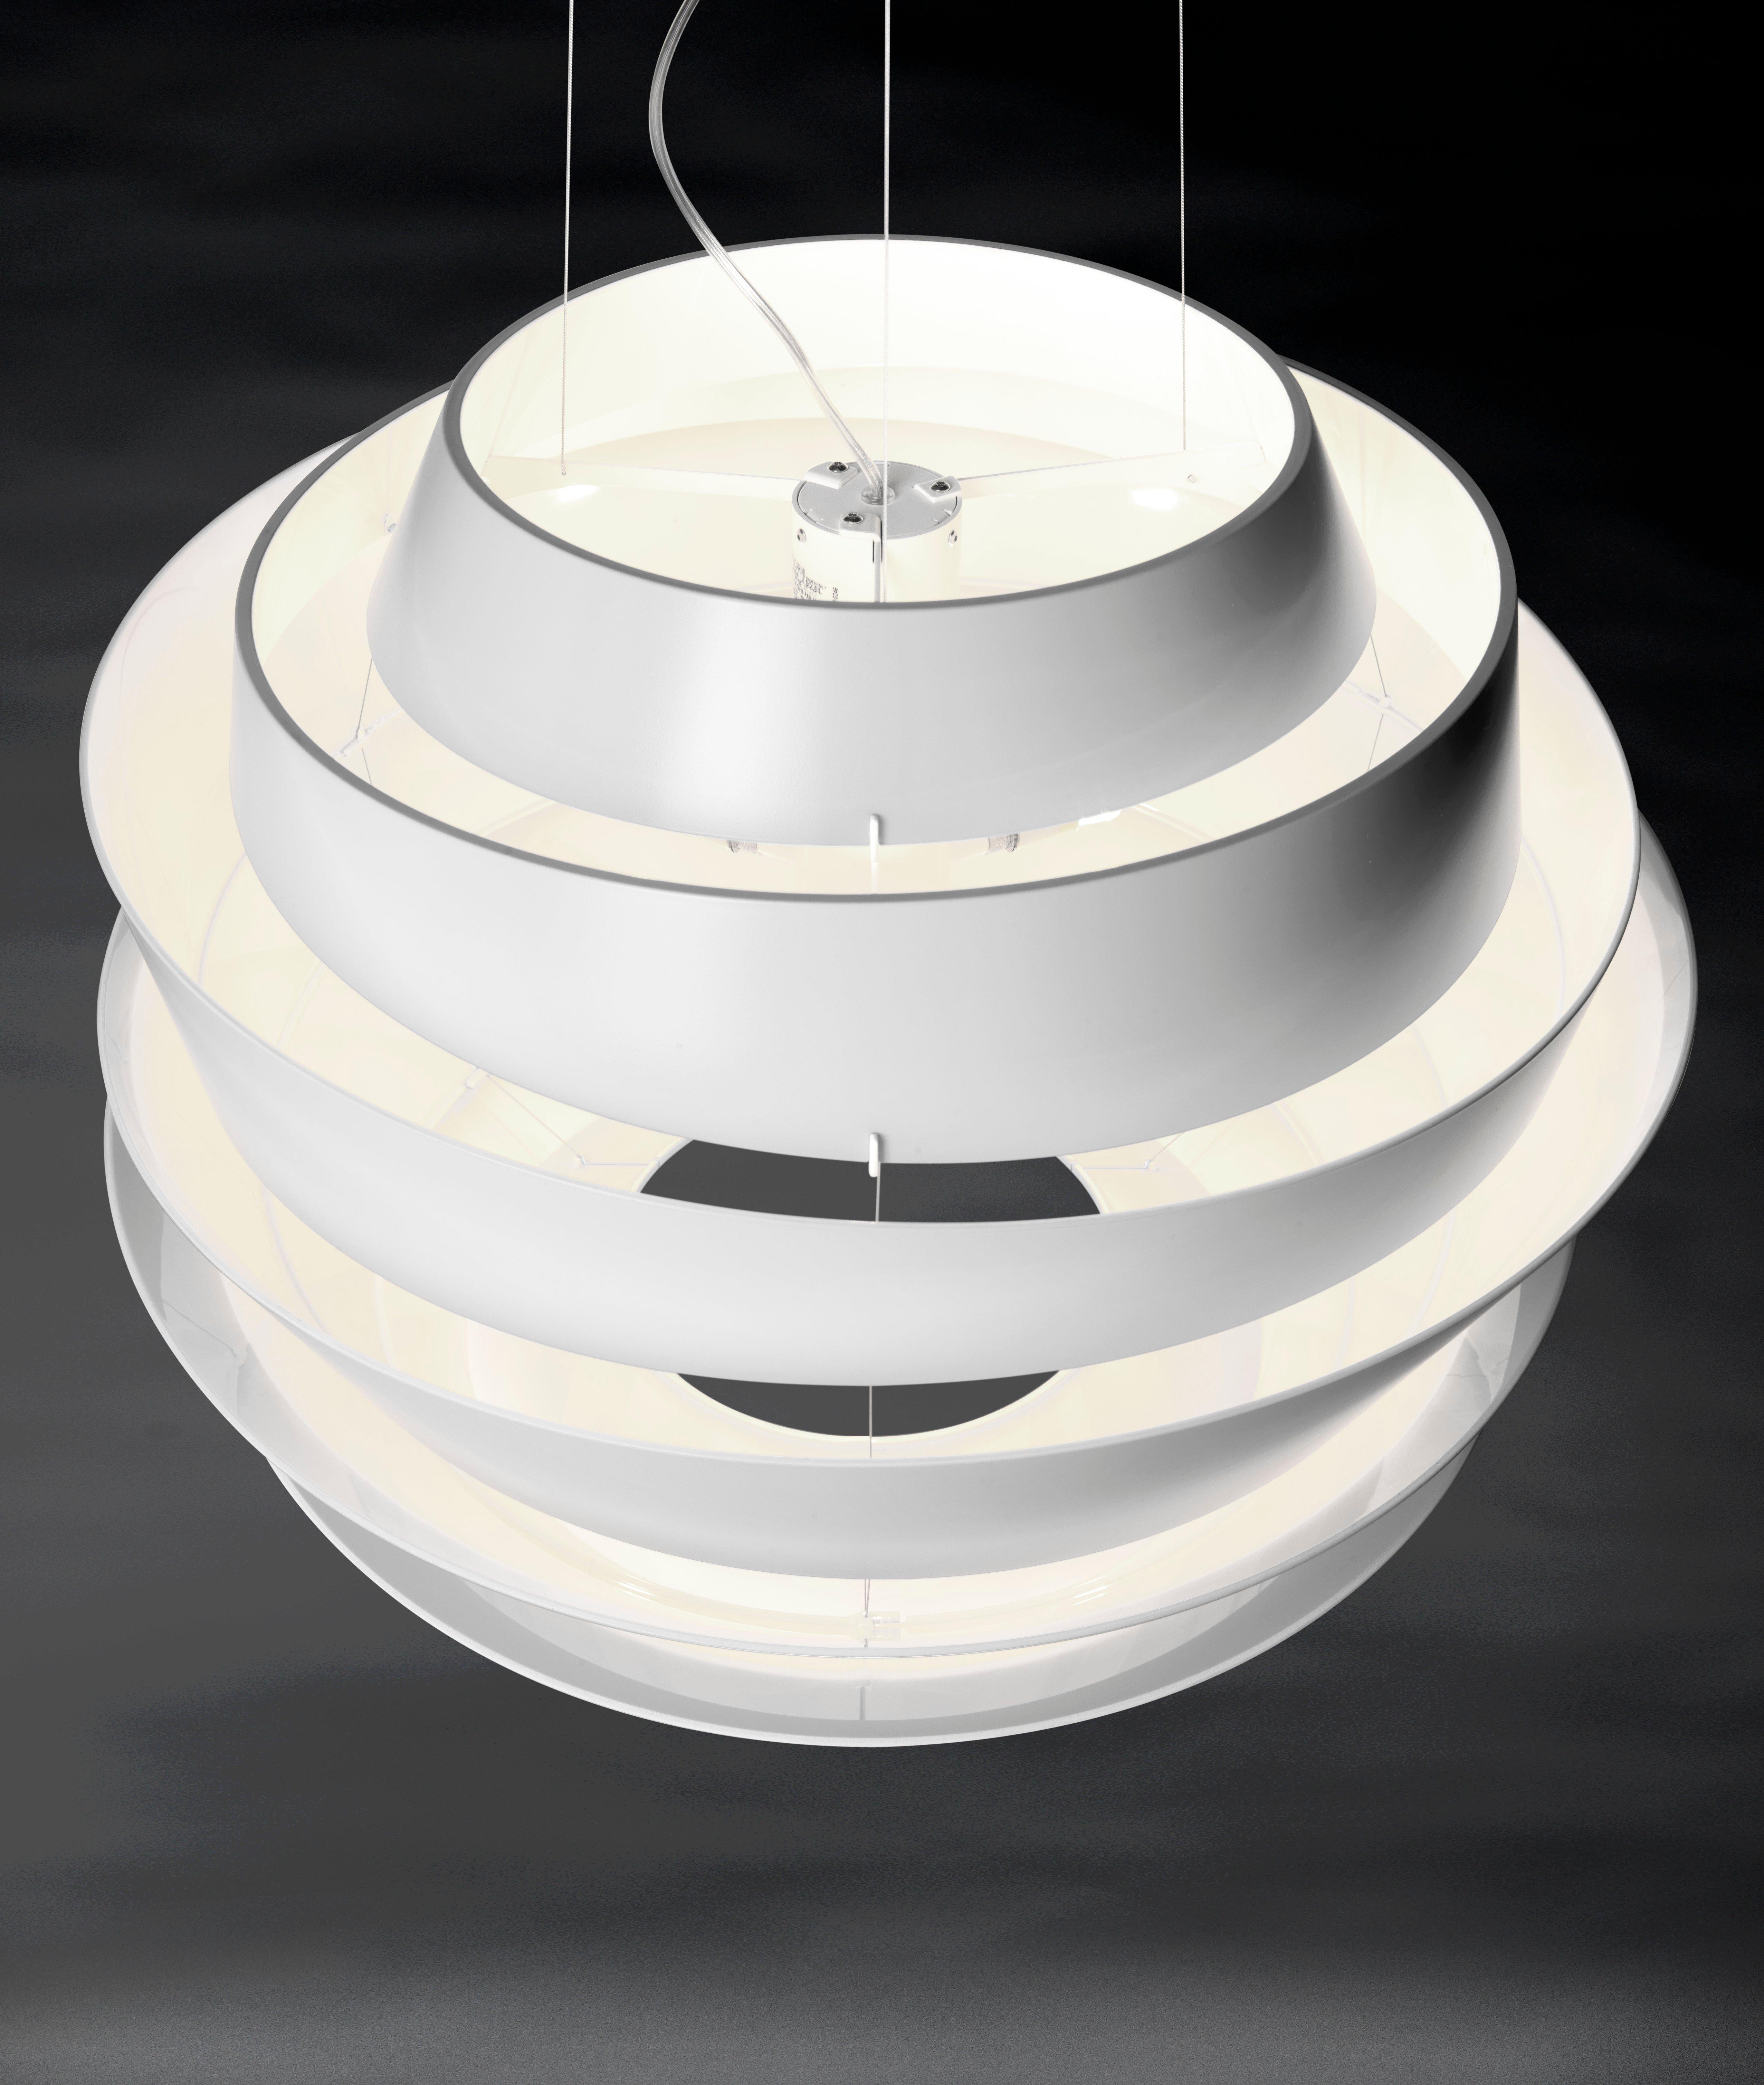 Suspension lamp with diffused and direct light. Diffuser consisting of 6 rings of various diameters and shapes with an oblique cut, made of matt finish injection molded polycarbonate, secured to the epoxy powder coated metal internal frame using 3